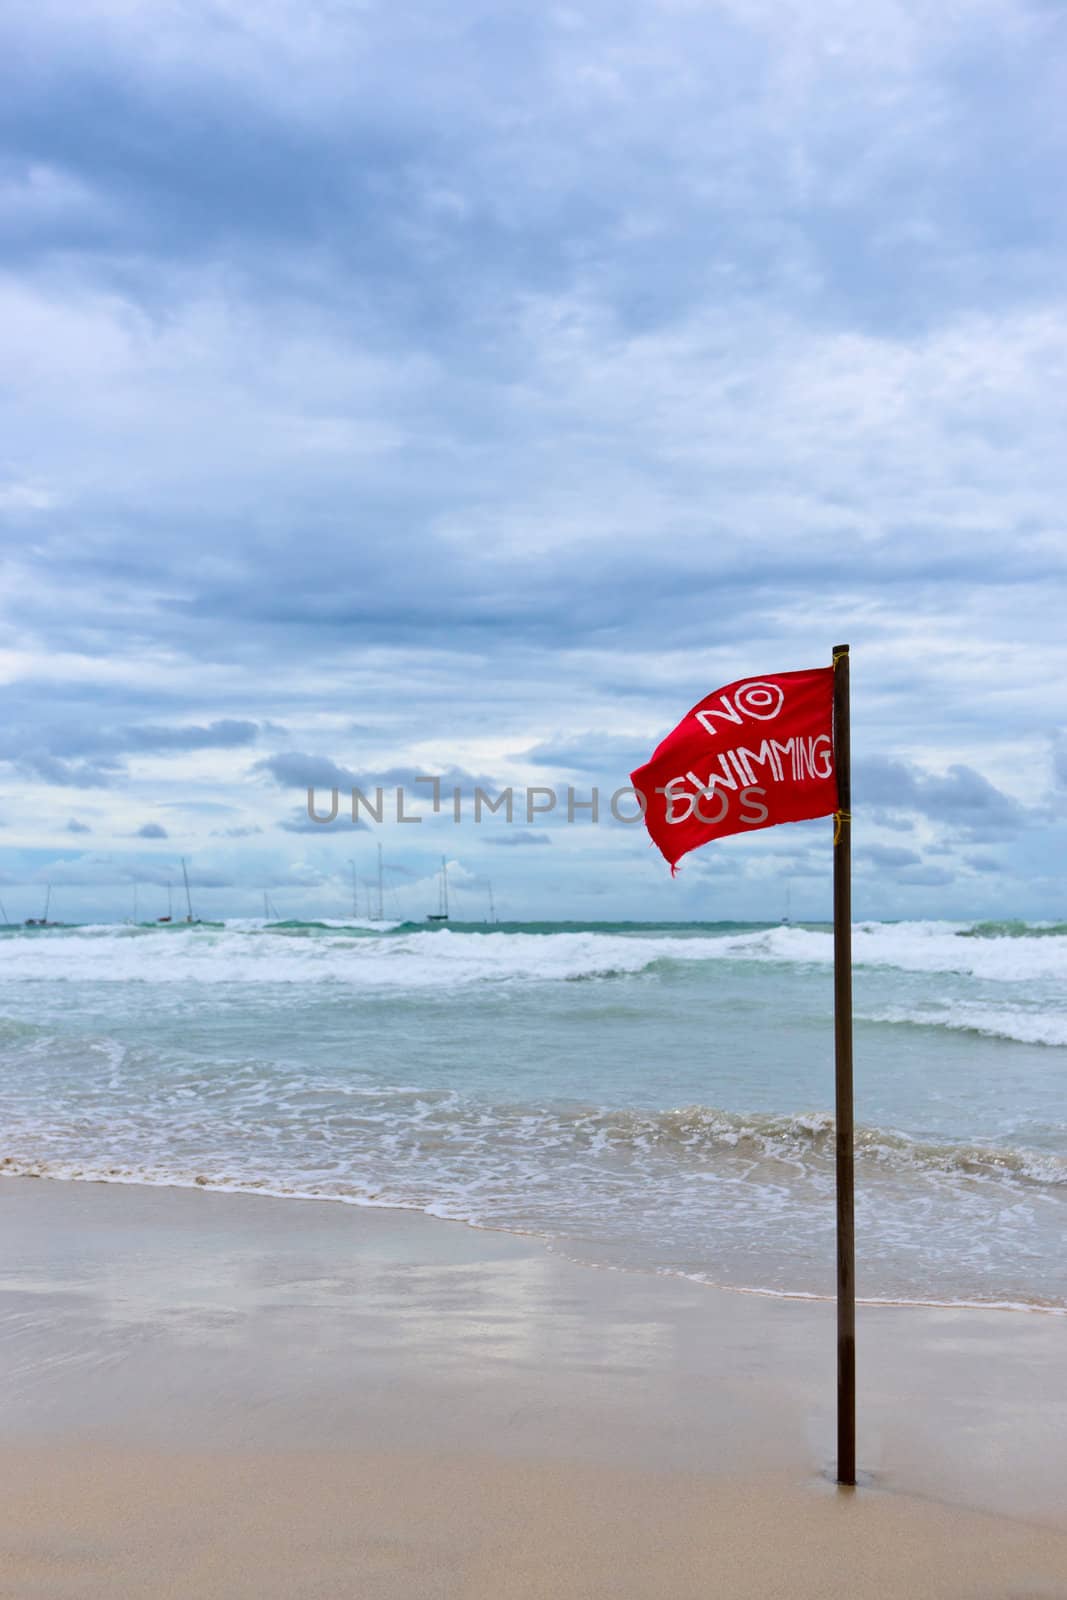 Red flag with warning text "no swimming"